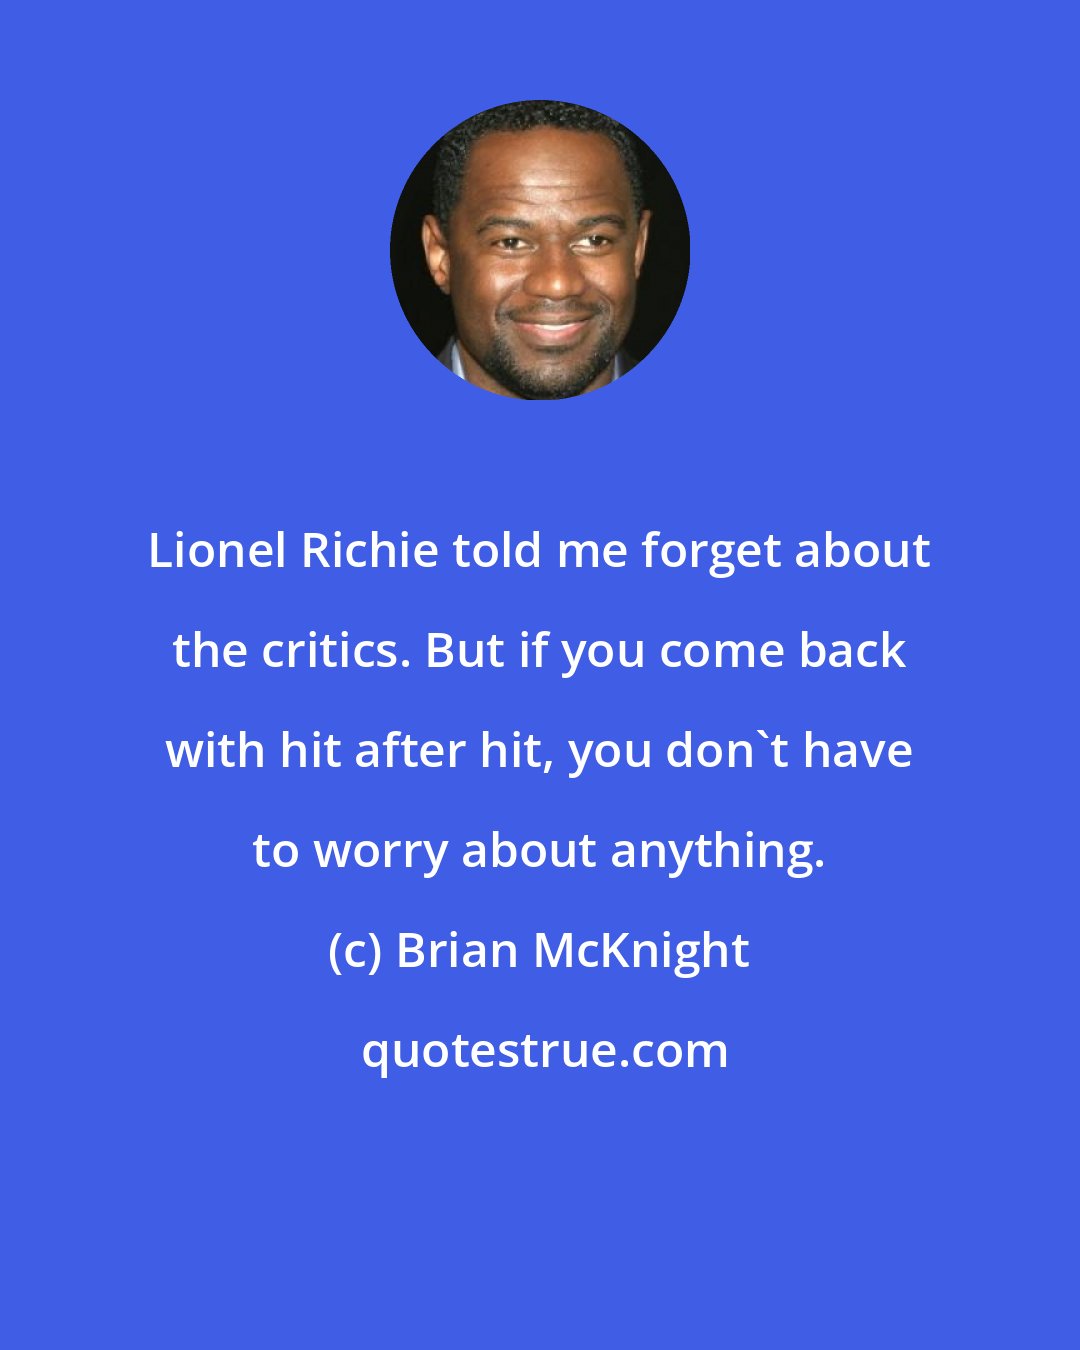 Brian McKnight: Lionel Richie told me forget about the critics. But if you come back with hit after hit, you don't have to worry about anything.